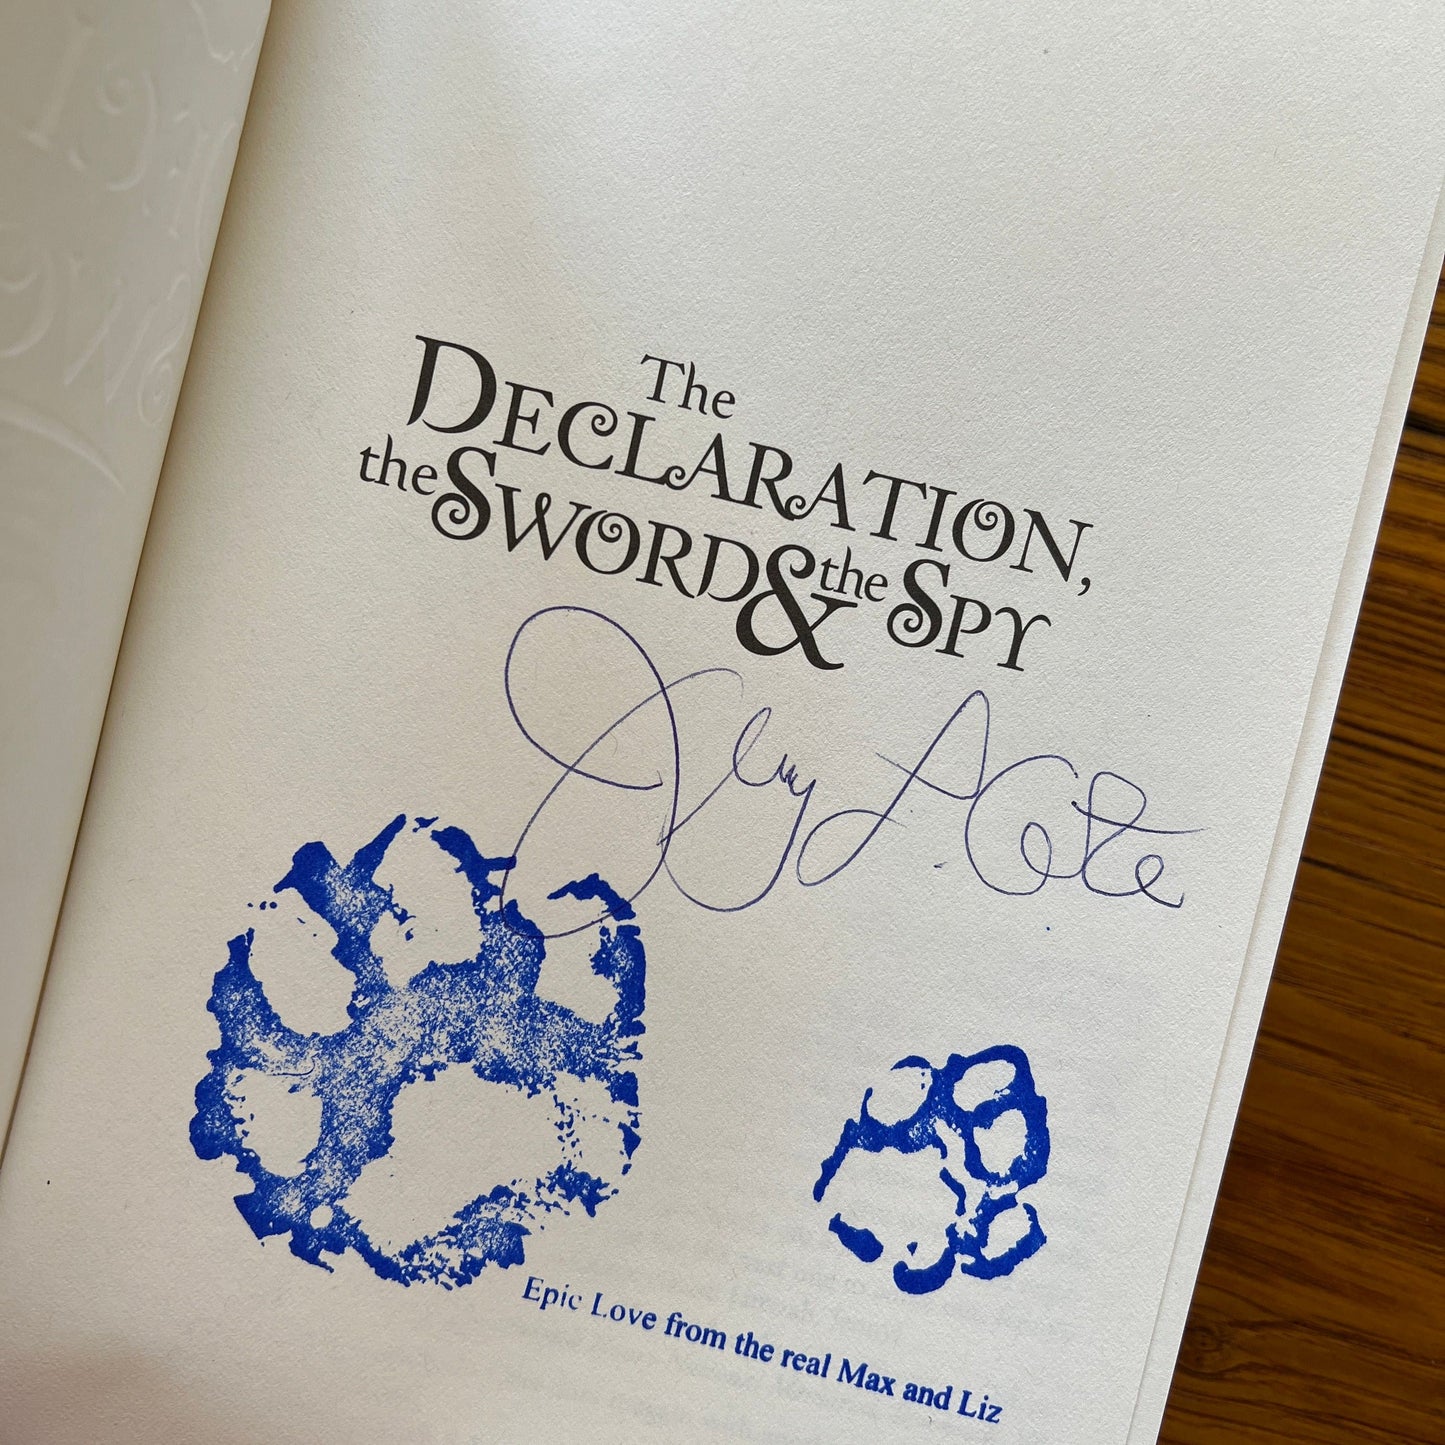 "The Declaration, the Sword, and the Spy" – Signed by the author, Jenny L. Cote